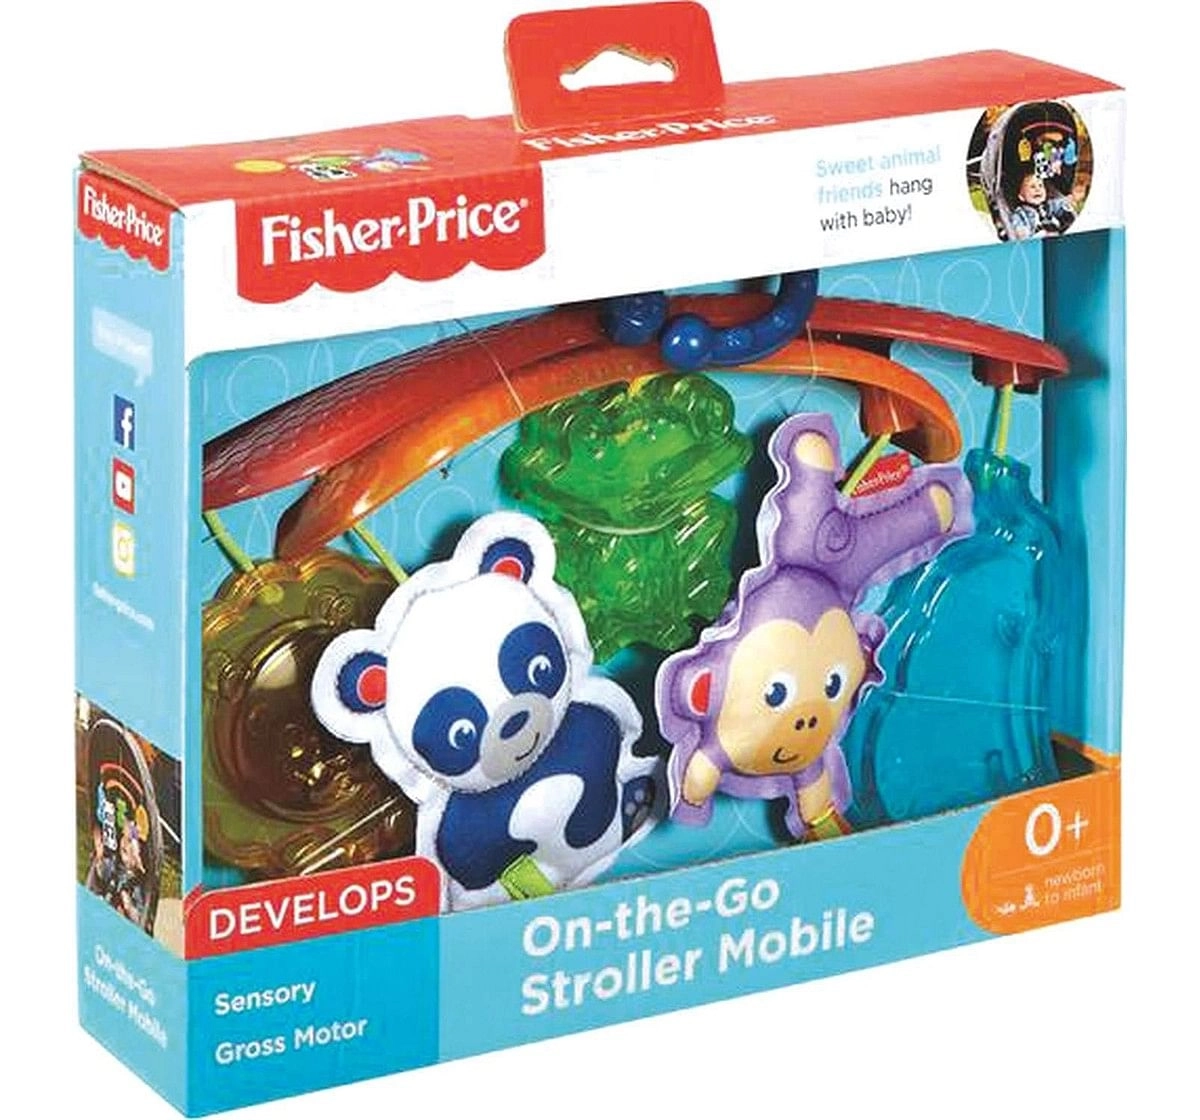 Fisher Price On-The-Go Stroller Mobile New Born for Kids age 12M+